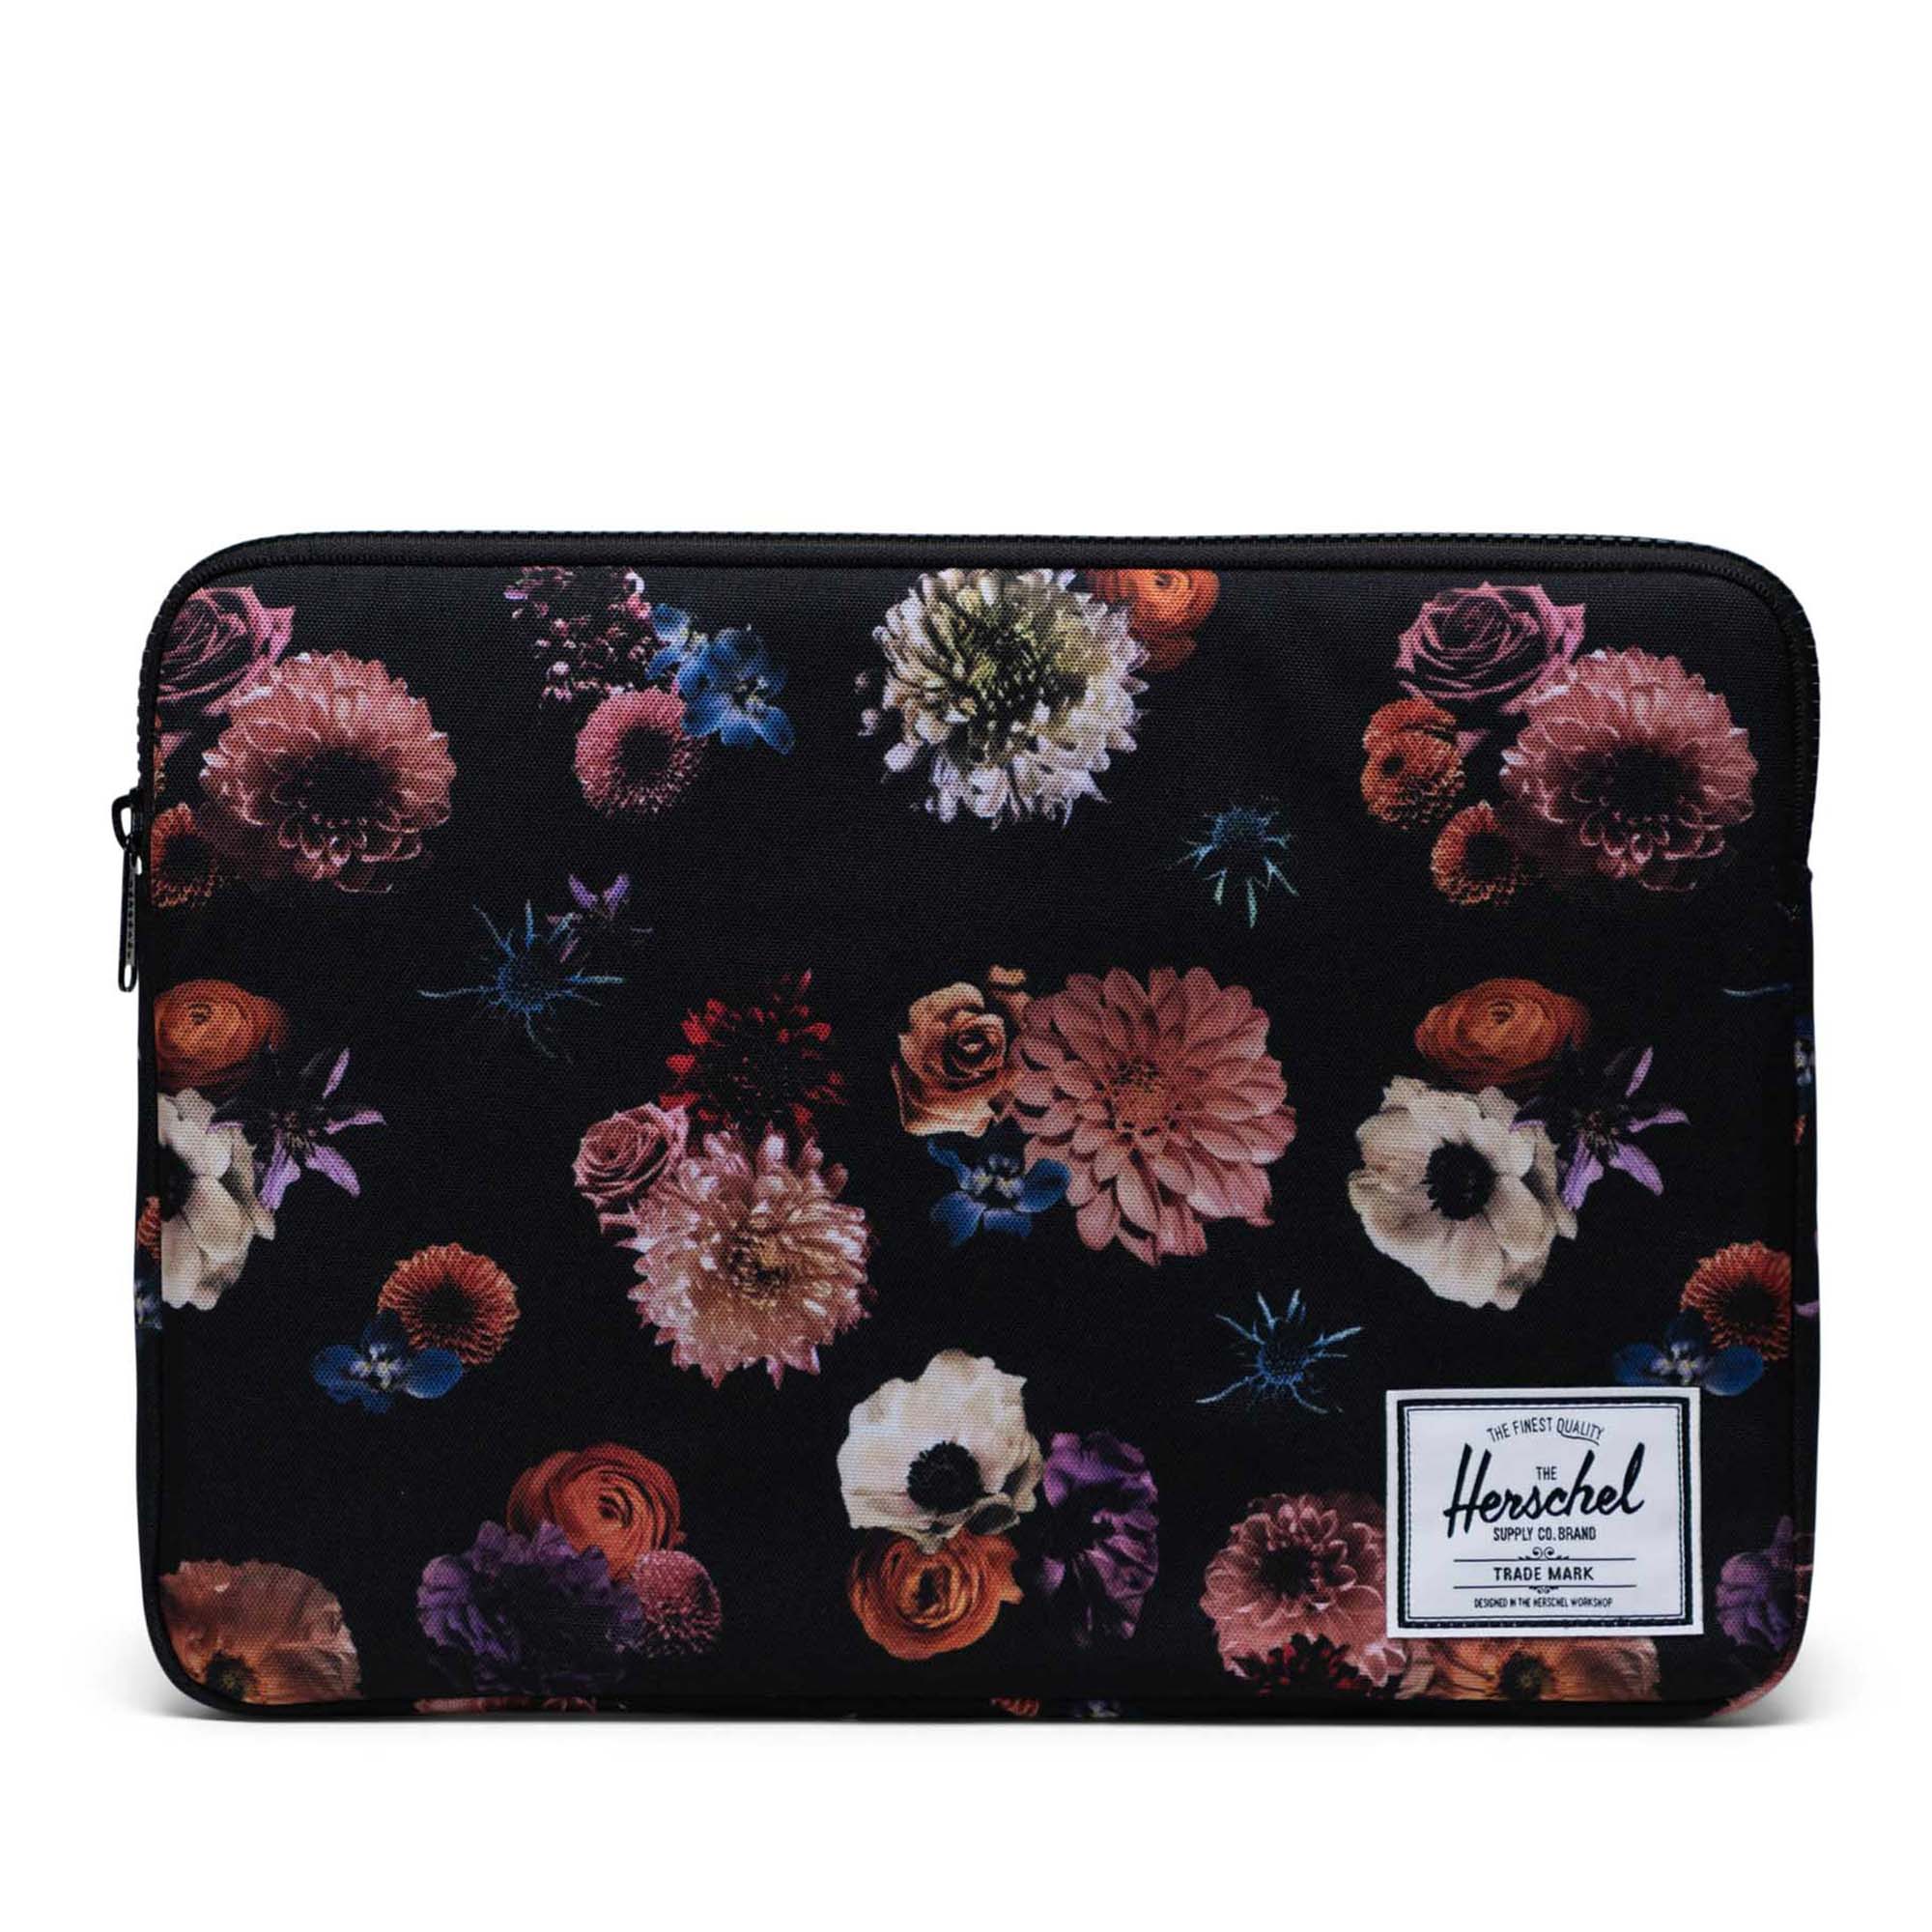 Herschel Anchor Sleeve for MacBook/Ipad, Dried Herb, One Size